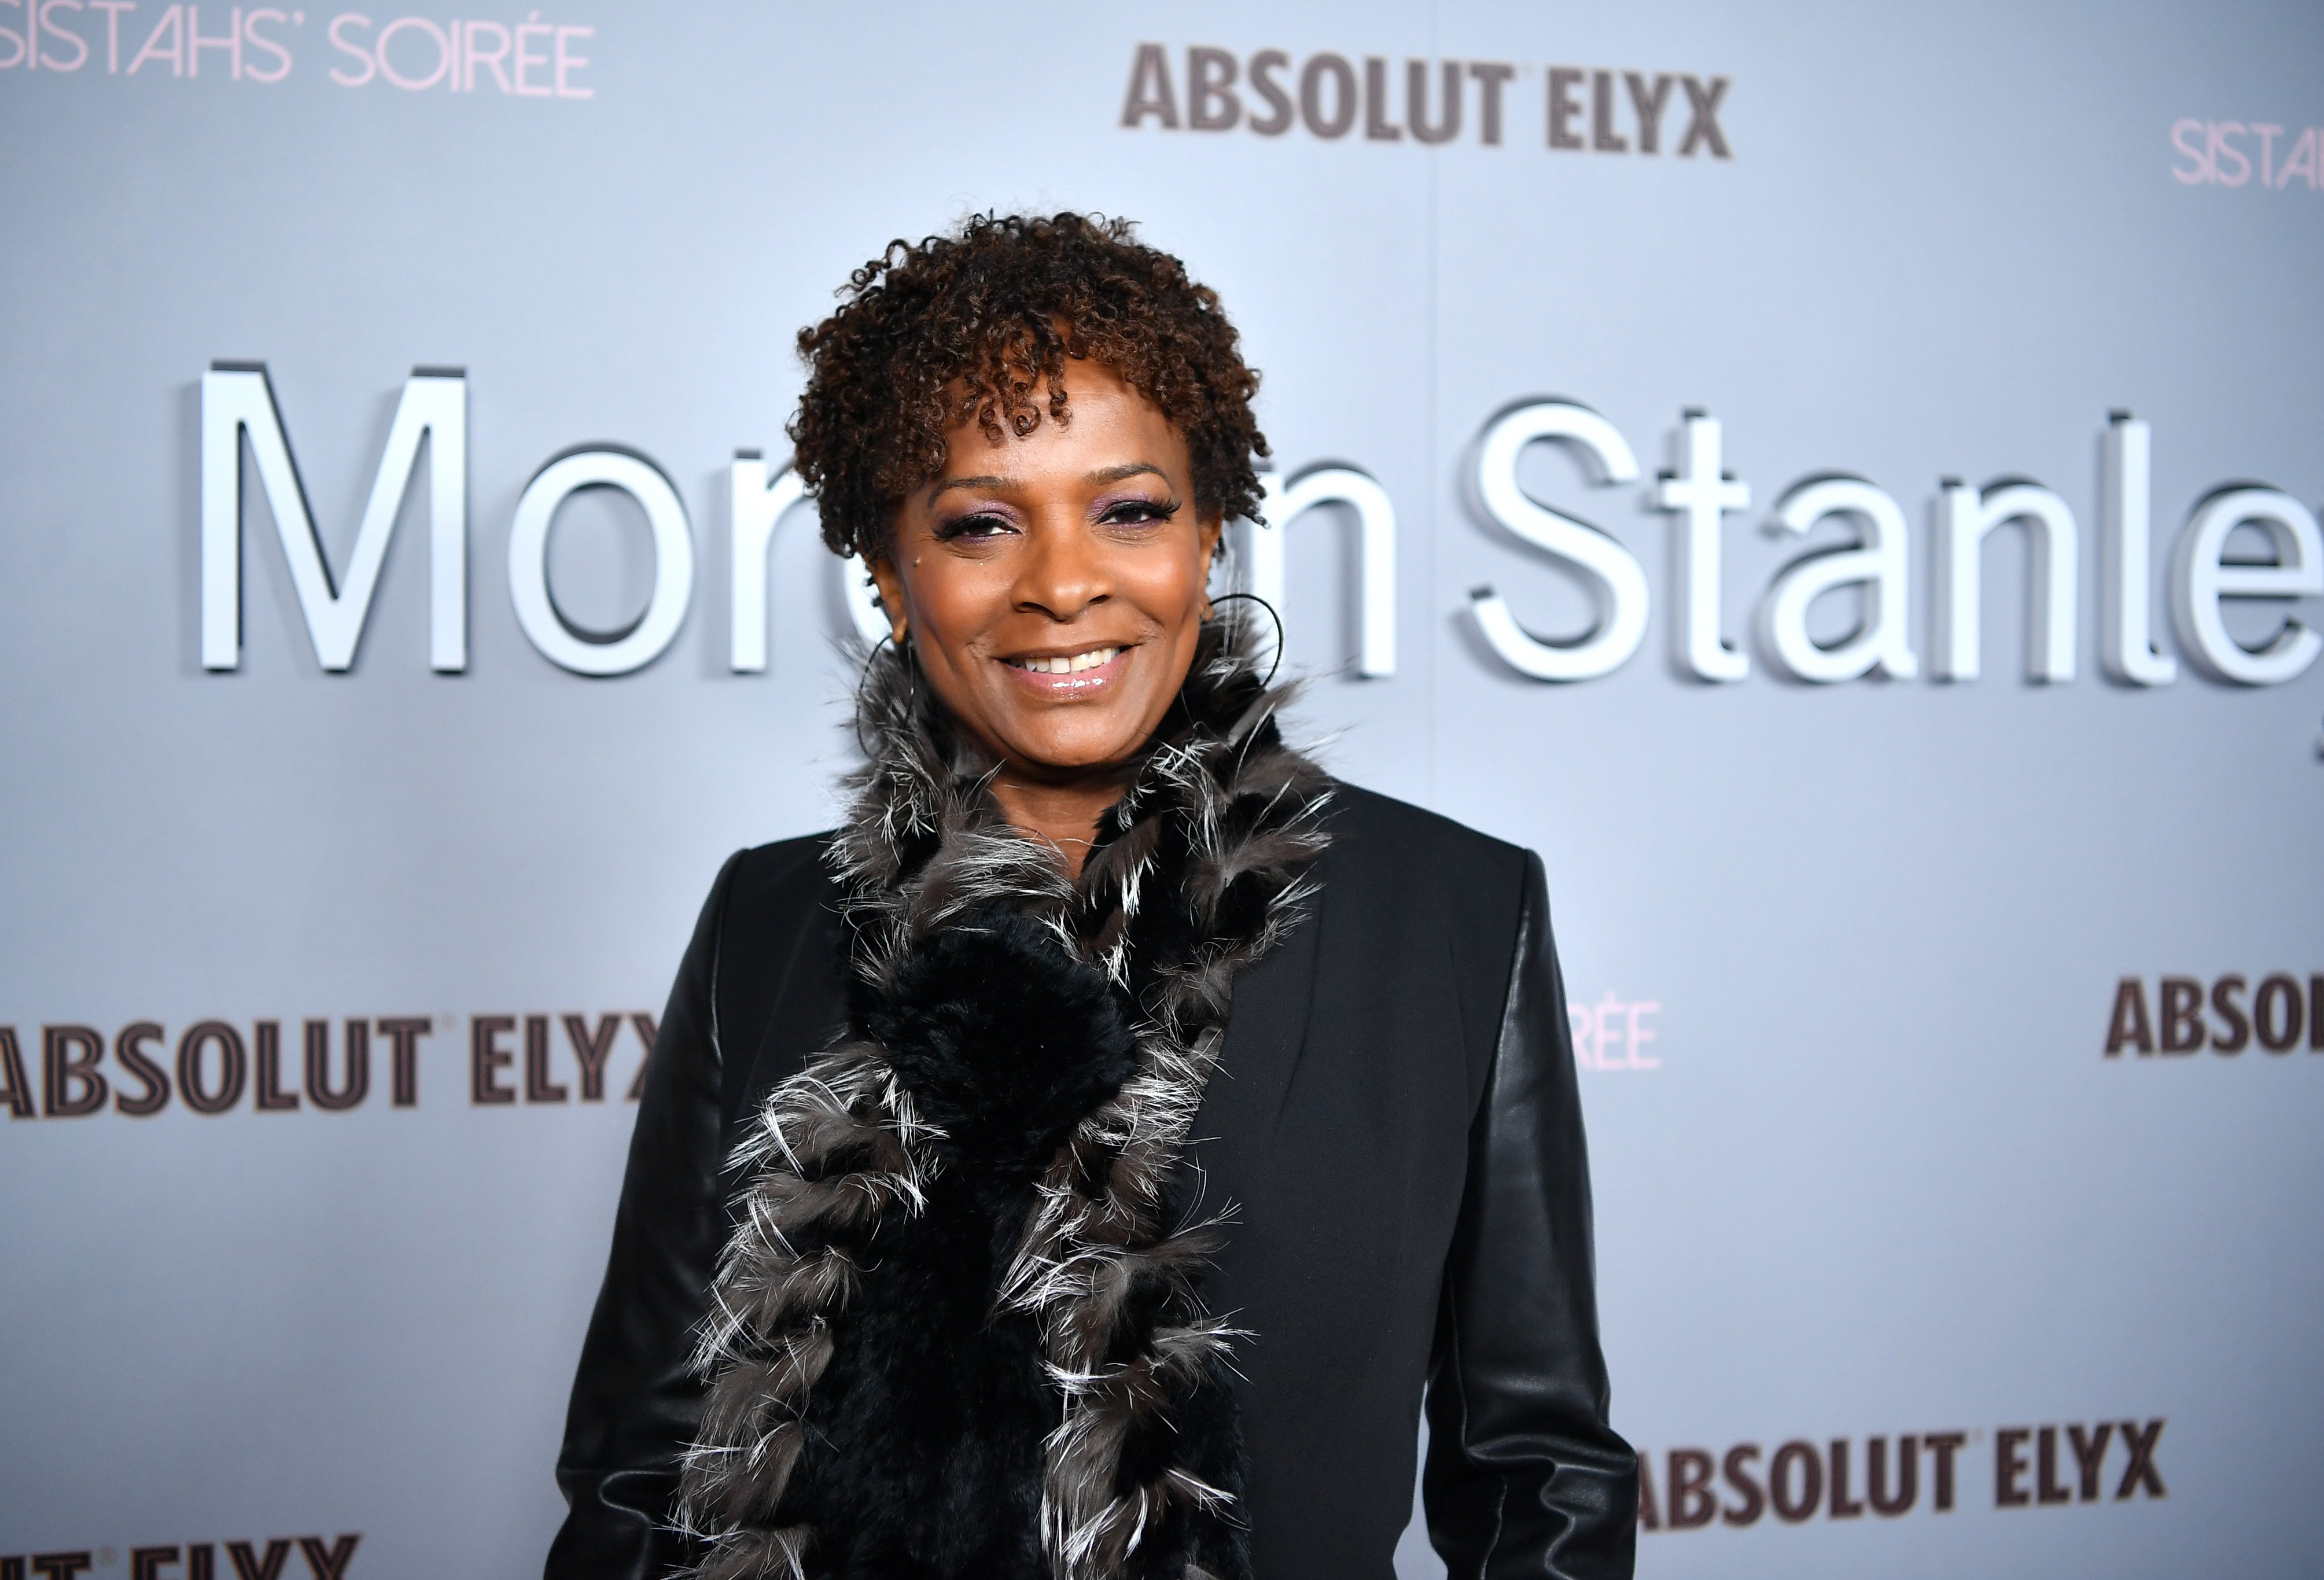 Coming to America cast member Vanessa Bell Calloway at the 11th Annual Sistahs' Soirée